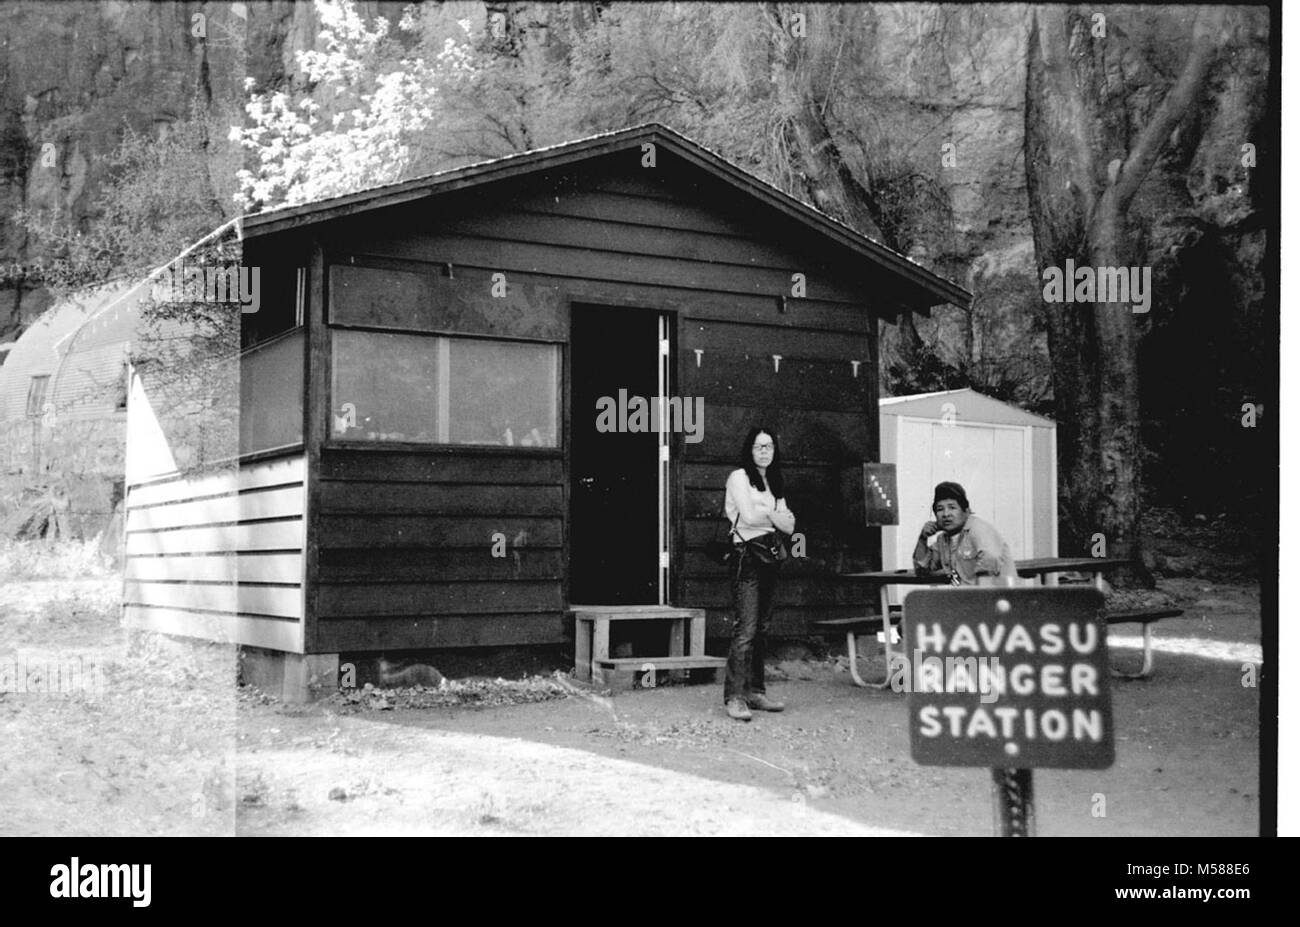 Grand Canyon Historic. EXTERIOR OF RANGER STATION. WOMAN STANDING. SUPAI EMPLOYEE OF NPS  CAMPGROUND AT HAVASU HAVASUPAI WHEN ADMINISTERED GRCA GRAND CANYON NATIONAL PARK. LEFT-SIDE DOUBLE EXPOSURE WITH SUPAI CHURCH ?  CIRCA 1977, Stock Photo